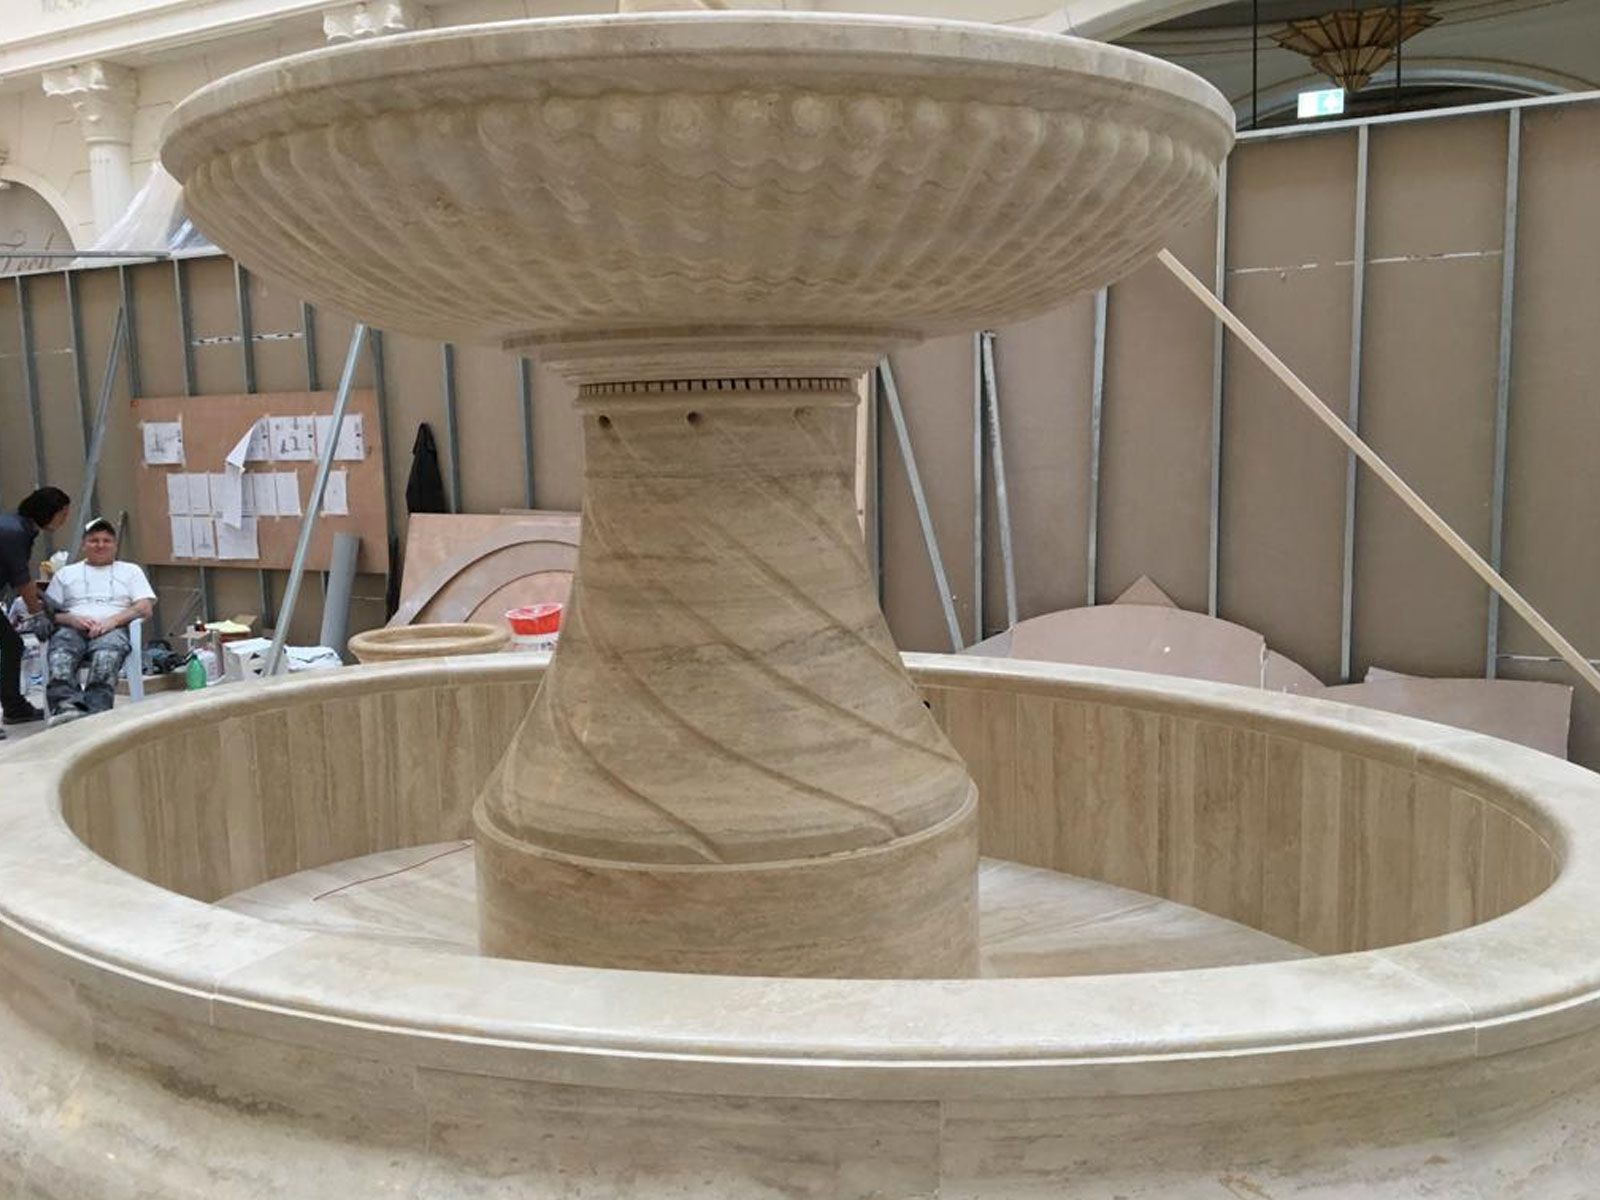 A phase of the assembly of the intravertine fountain